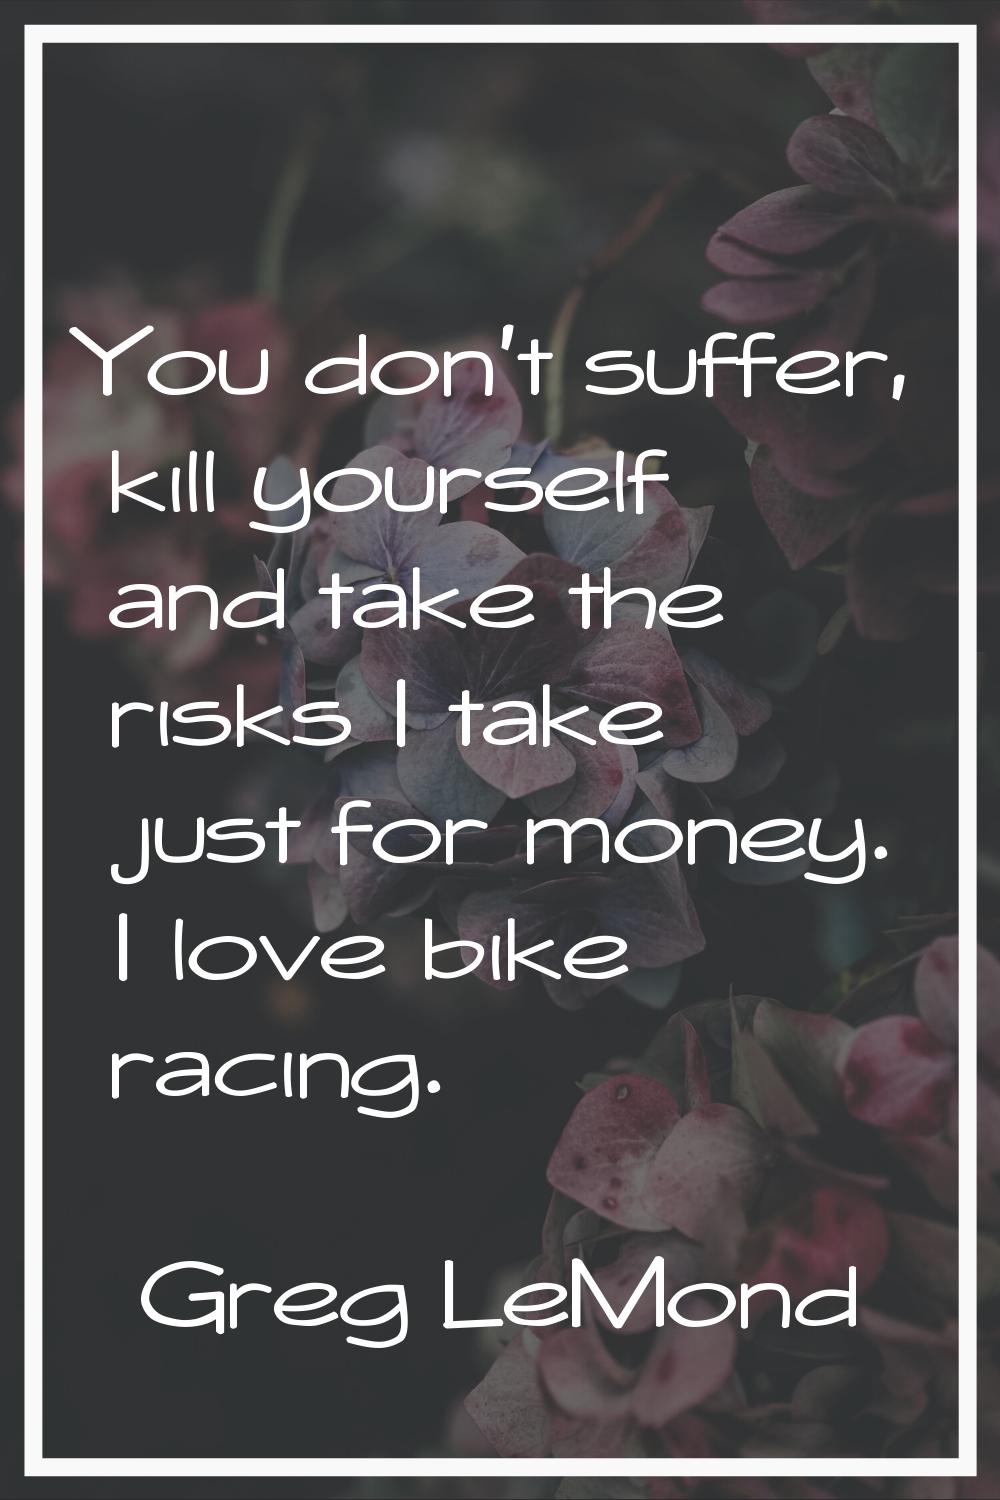 You don't suffer, kill yourself and take the risks I take just for money. I love bike racing.